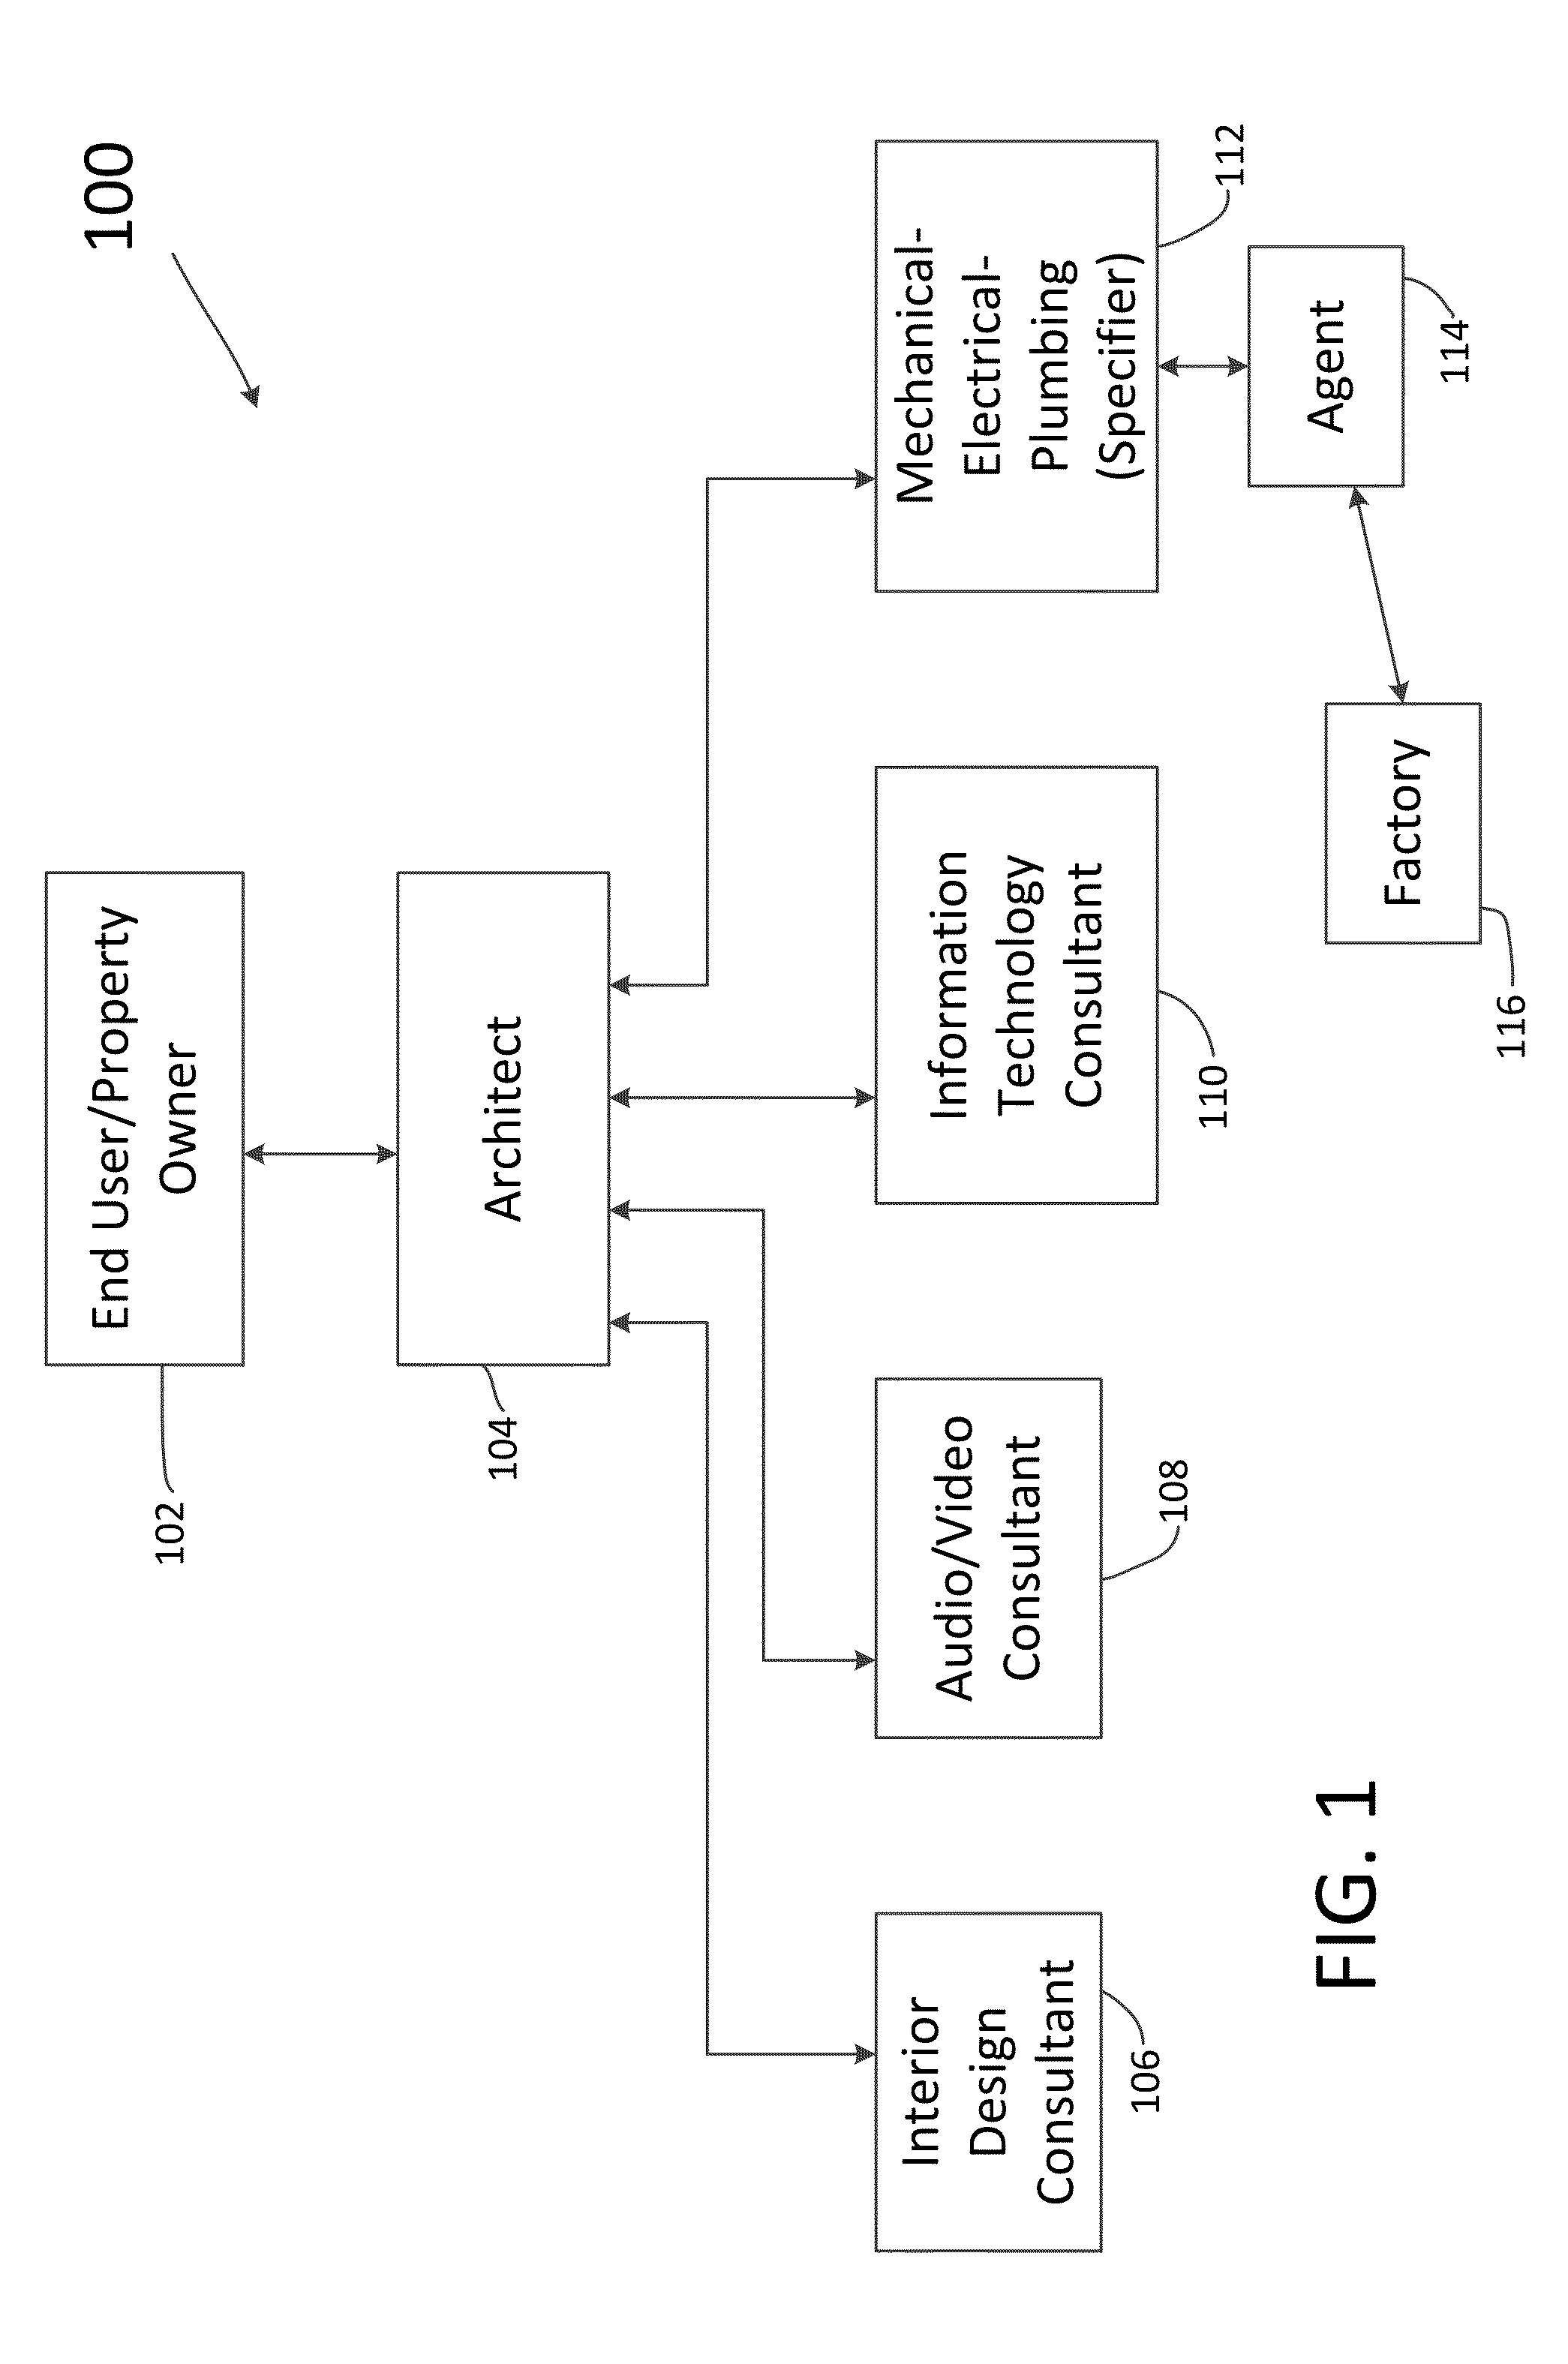 System and method for modeling a lighting control system